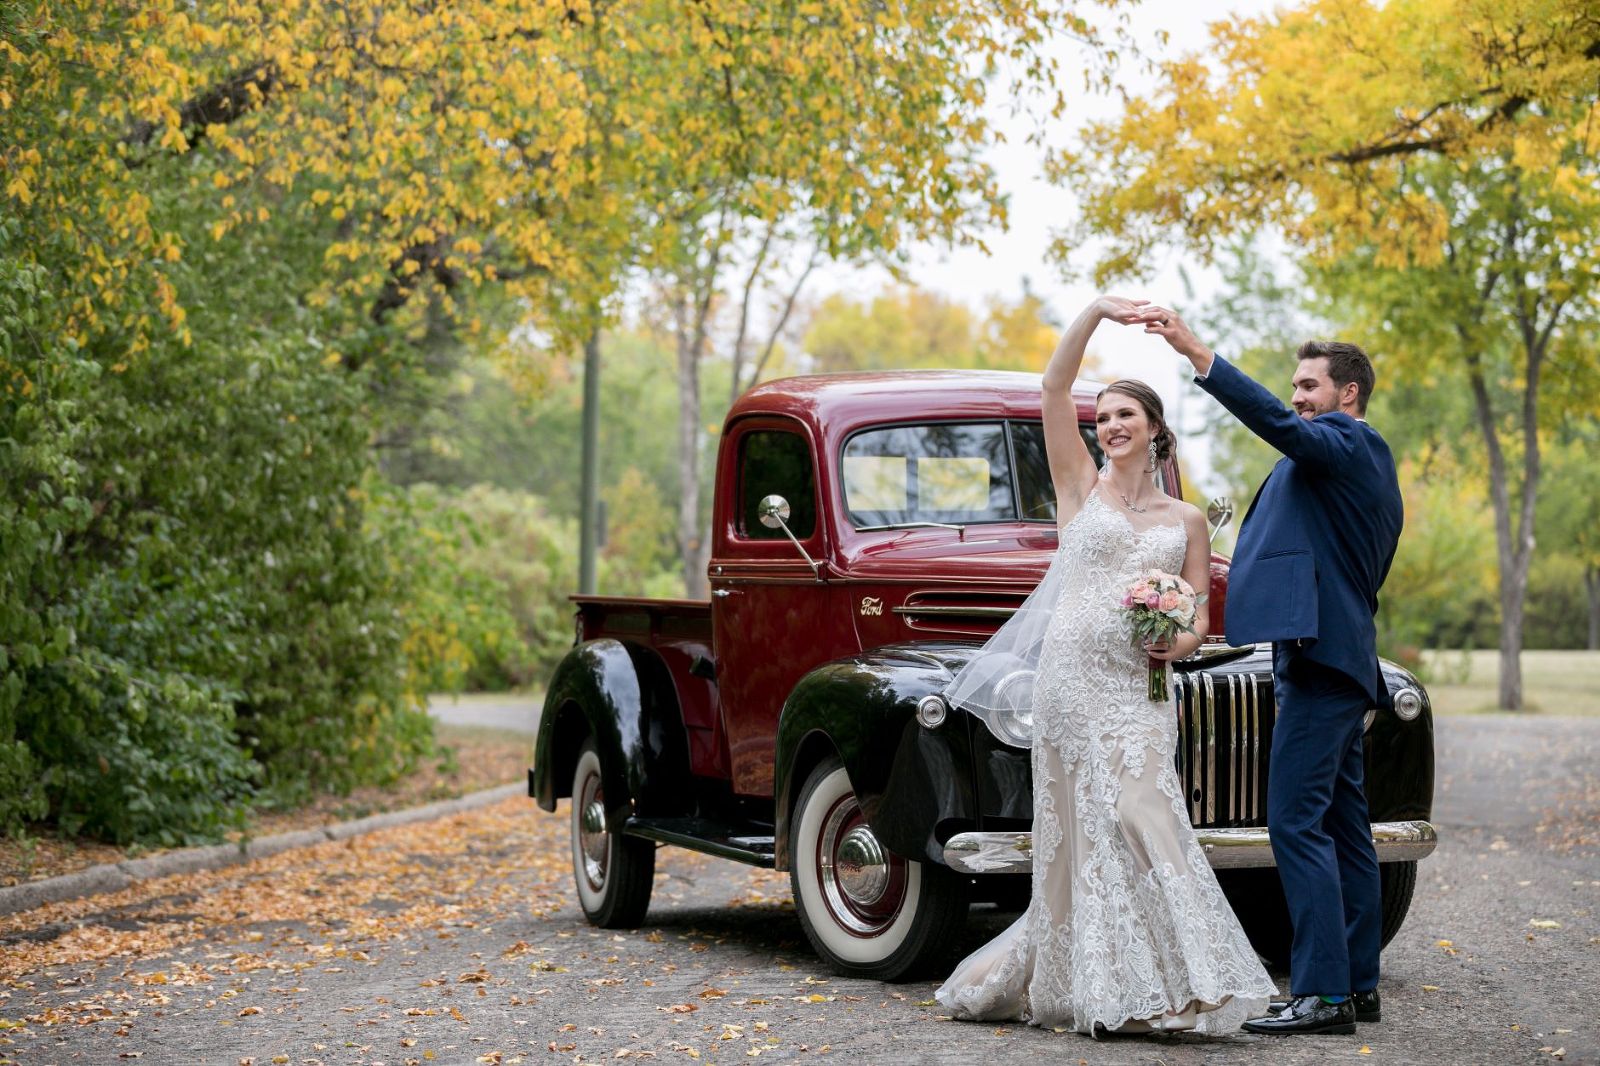 wedding photographed in Regina, Saskatchewan. A bride and groom dance in the road in front a classic truck with fall leaves.